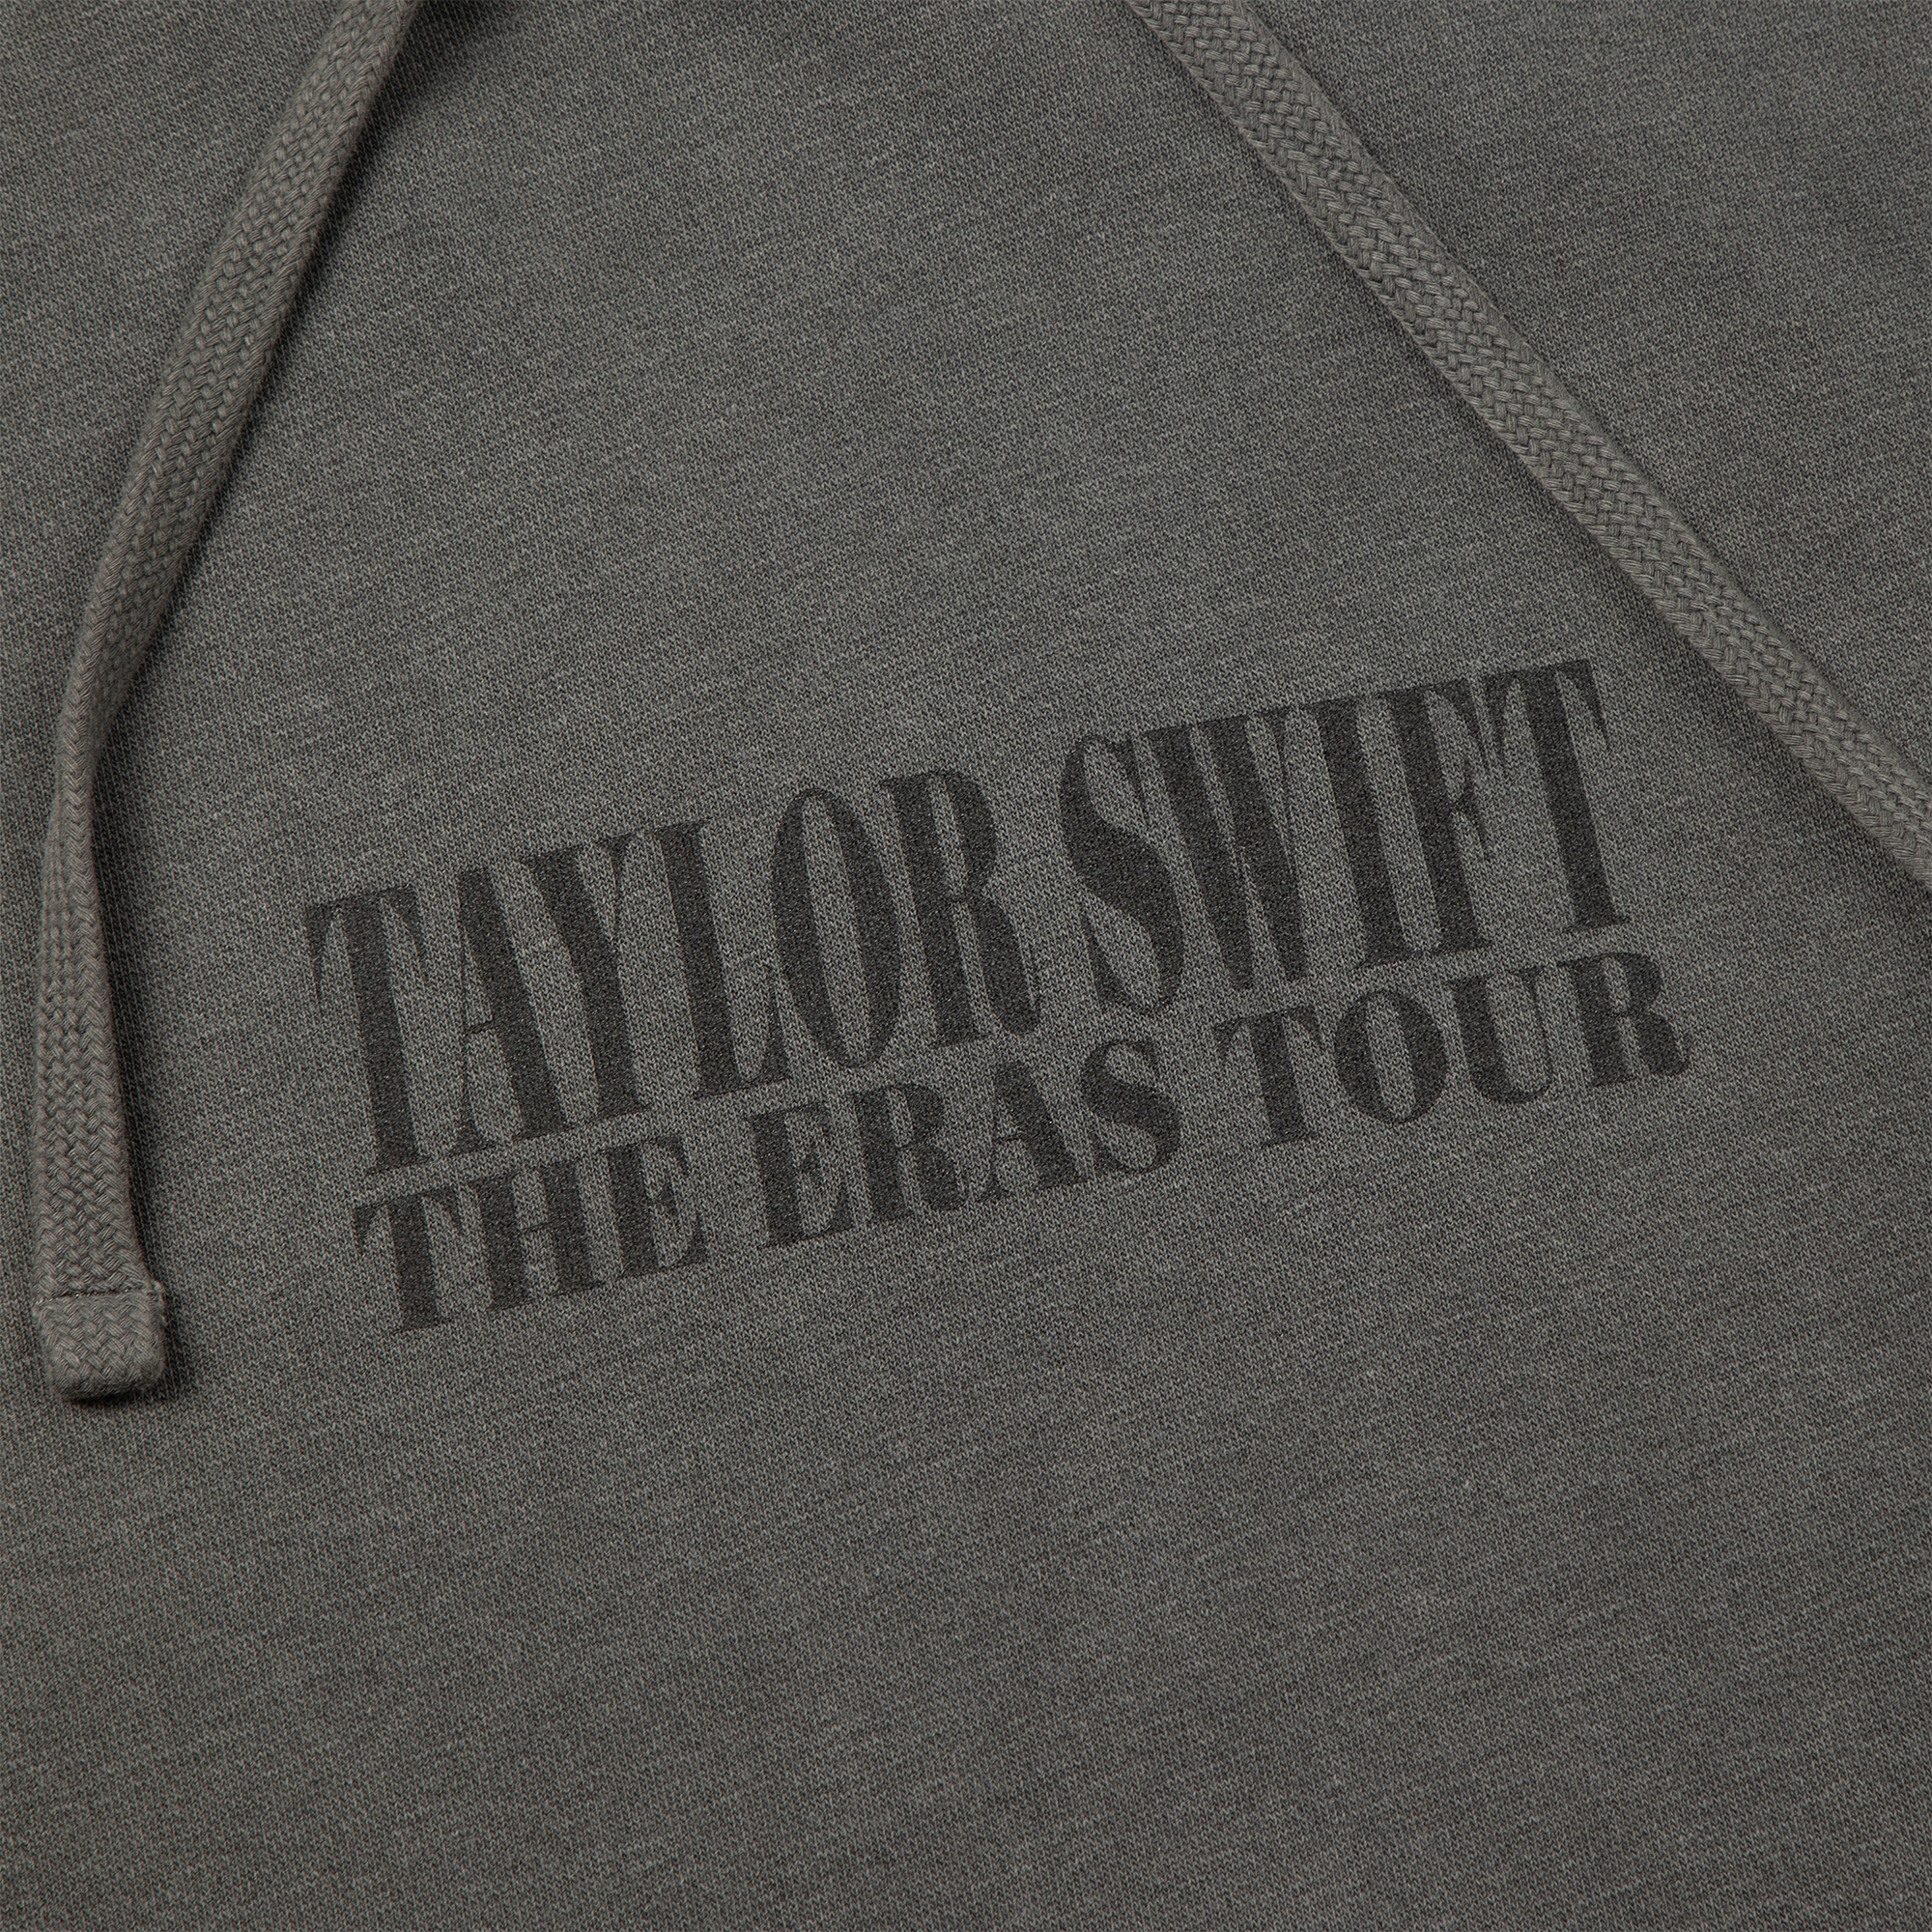 Taylor Swift | The Eras Tour Charcoal Hoodie - Taylor Swift 